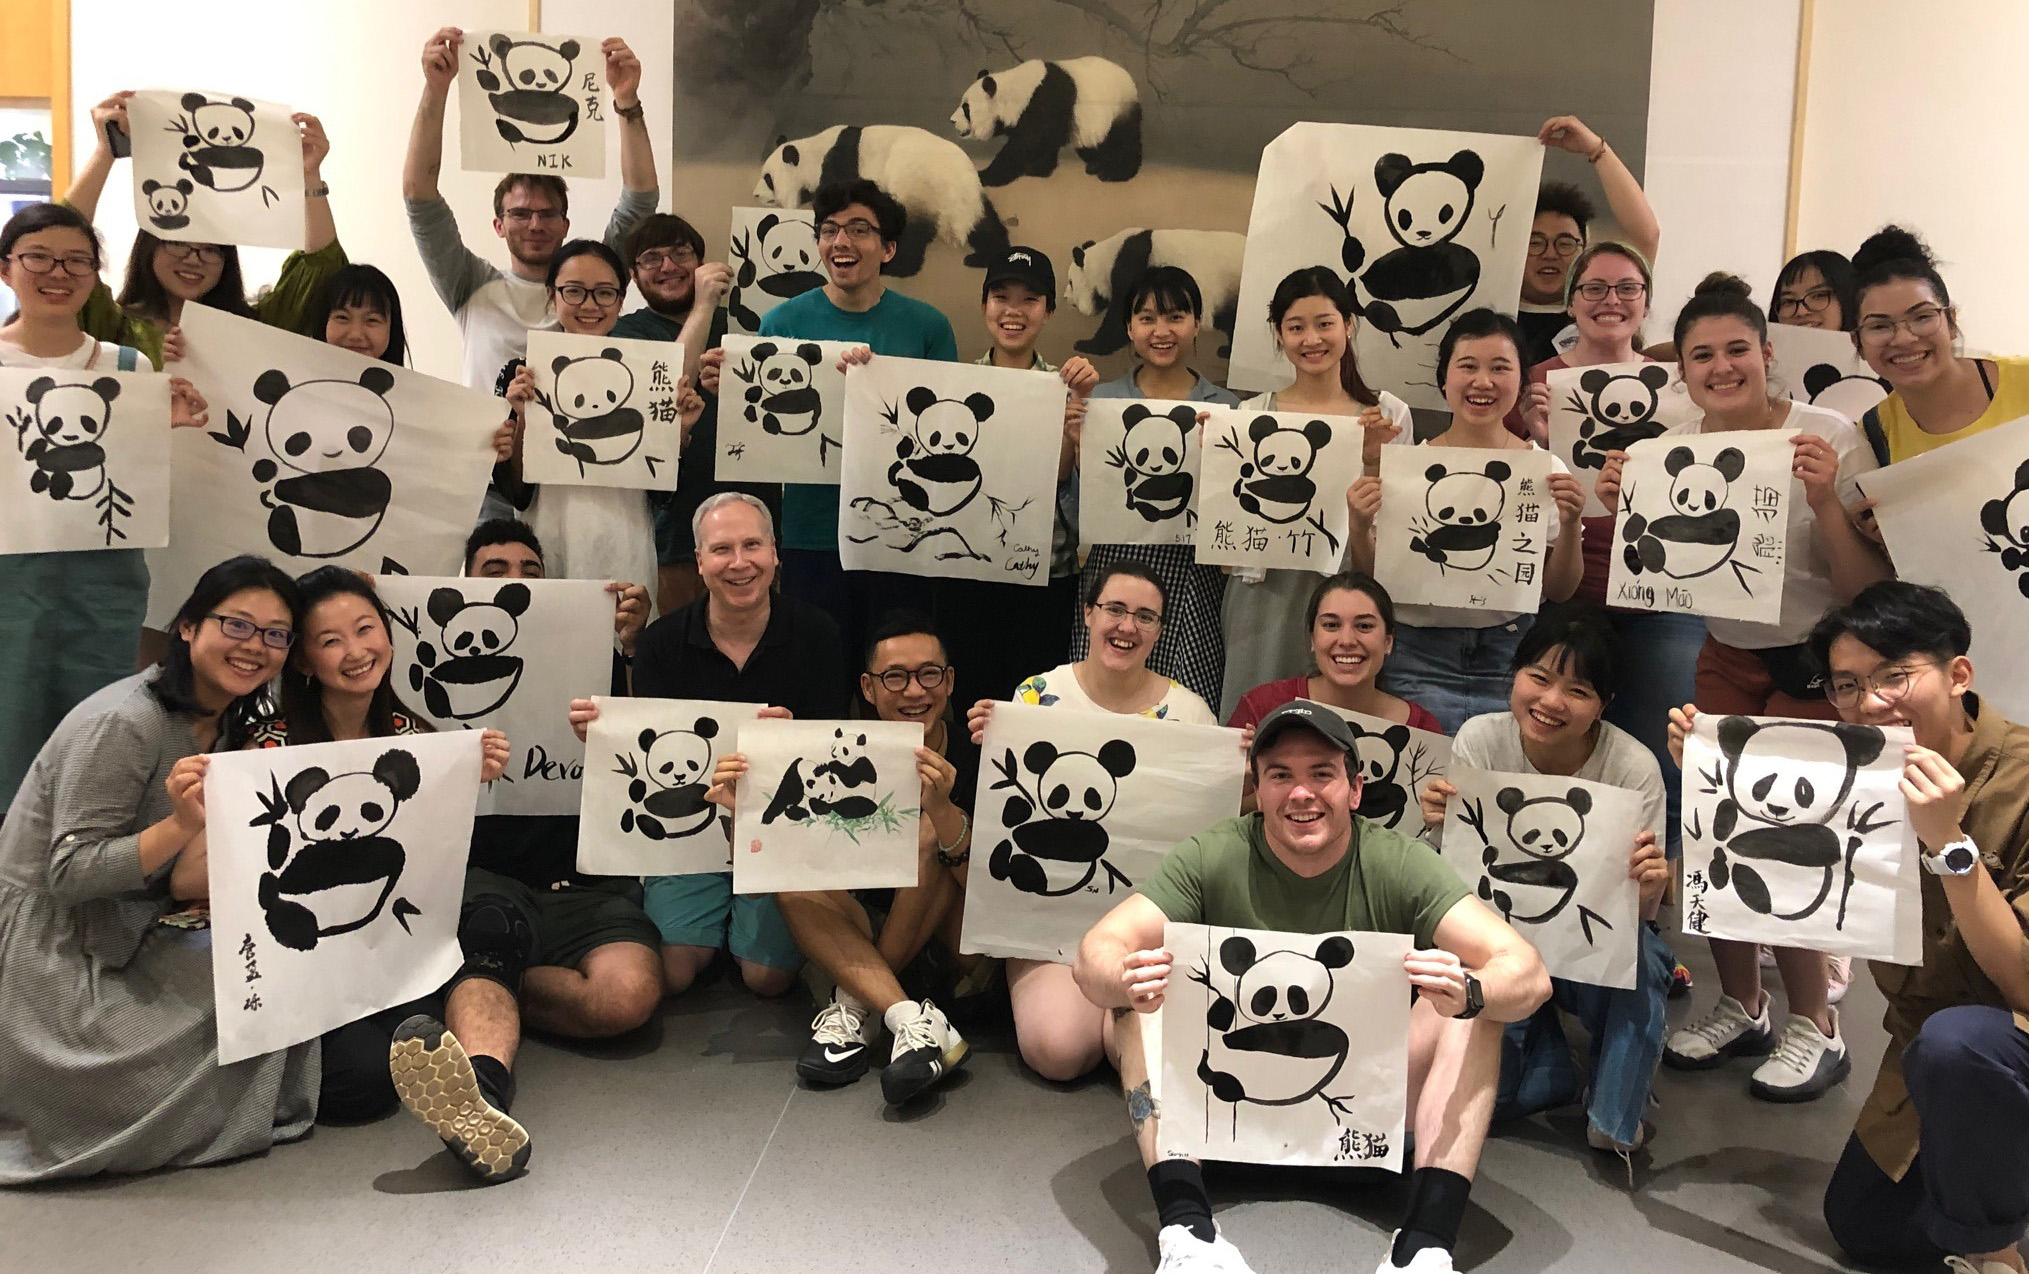 YSU students visiting Chengdu University and painting pandas using the traditional Chinese calligraphy method with students from Sichuan Normal University.